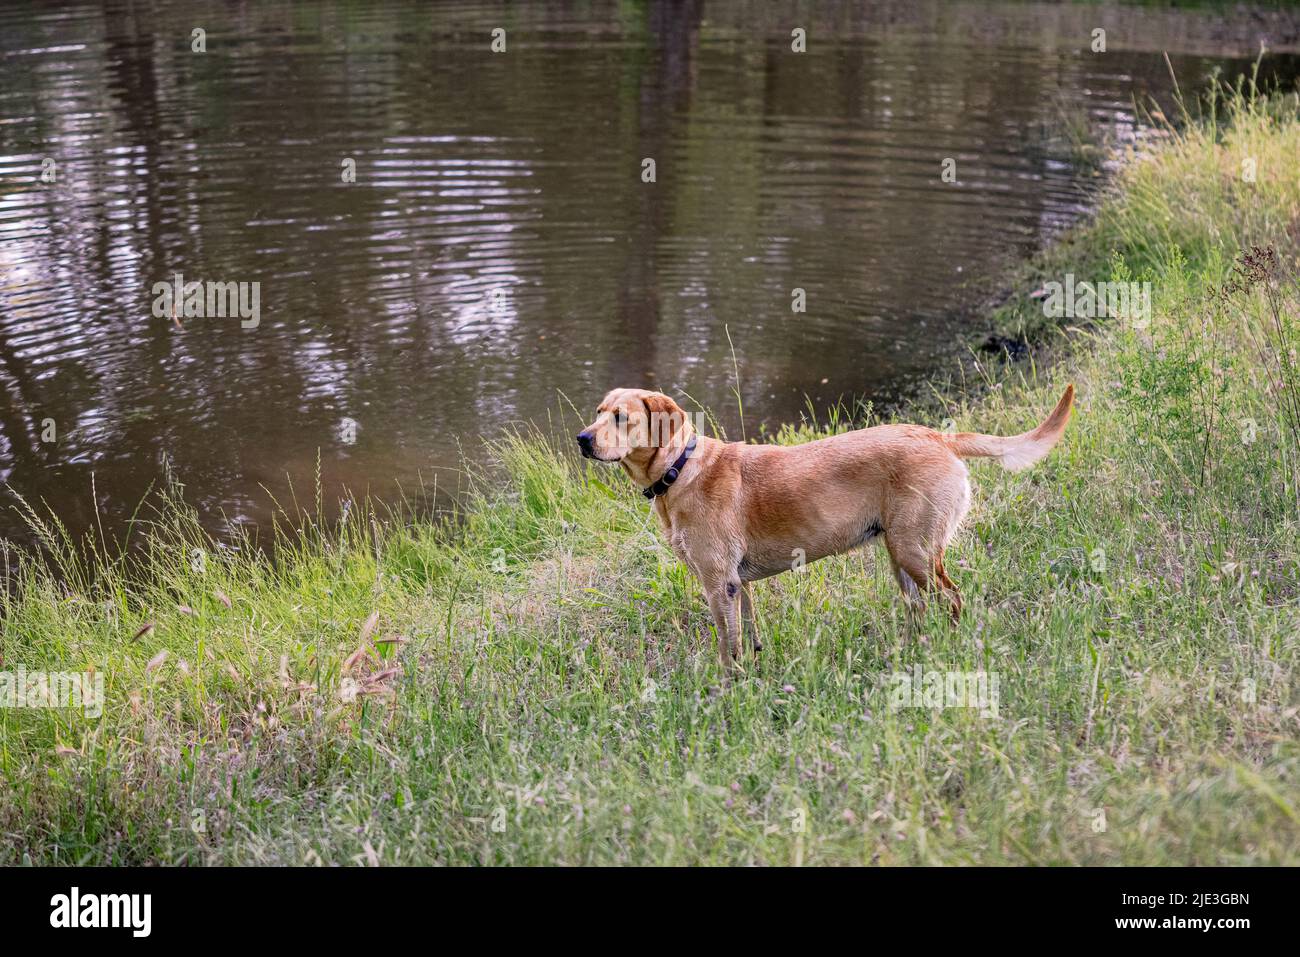 A yellow Labrador retriever waiting to chase the ball and swim in a pond. Stock Photo